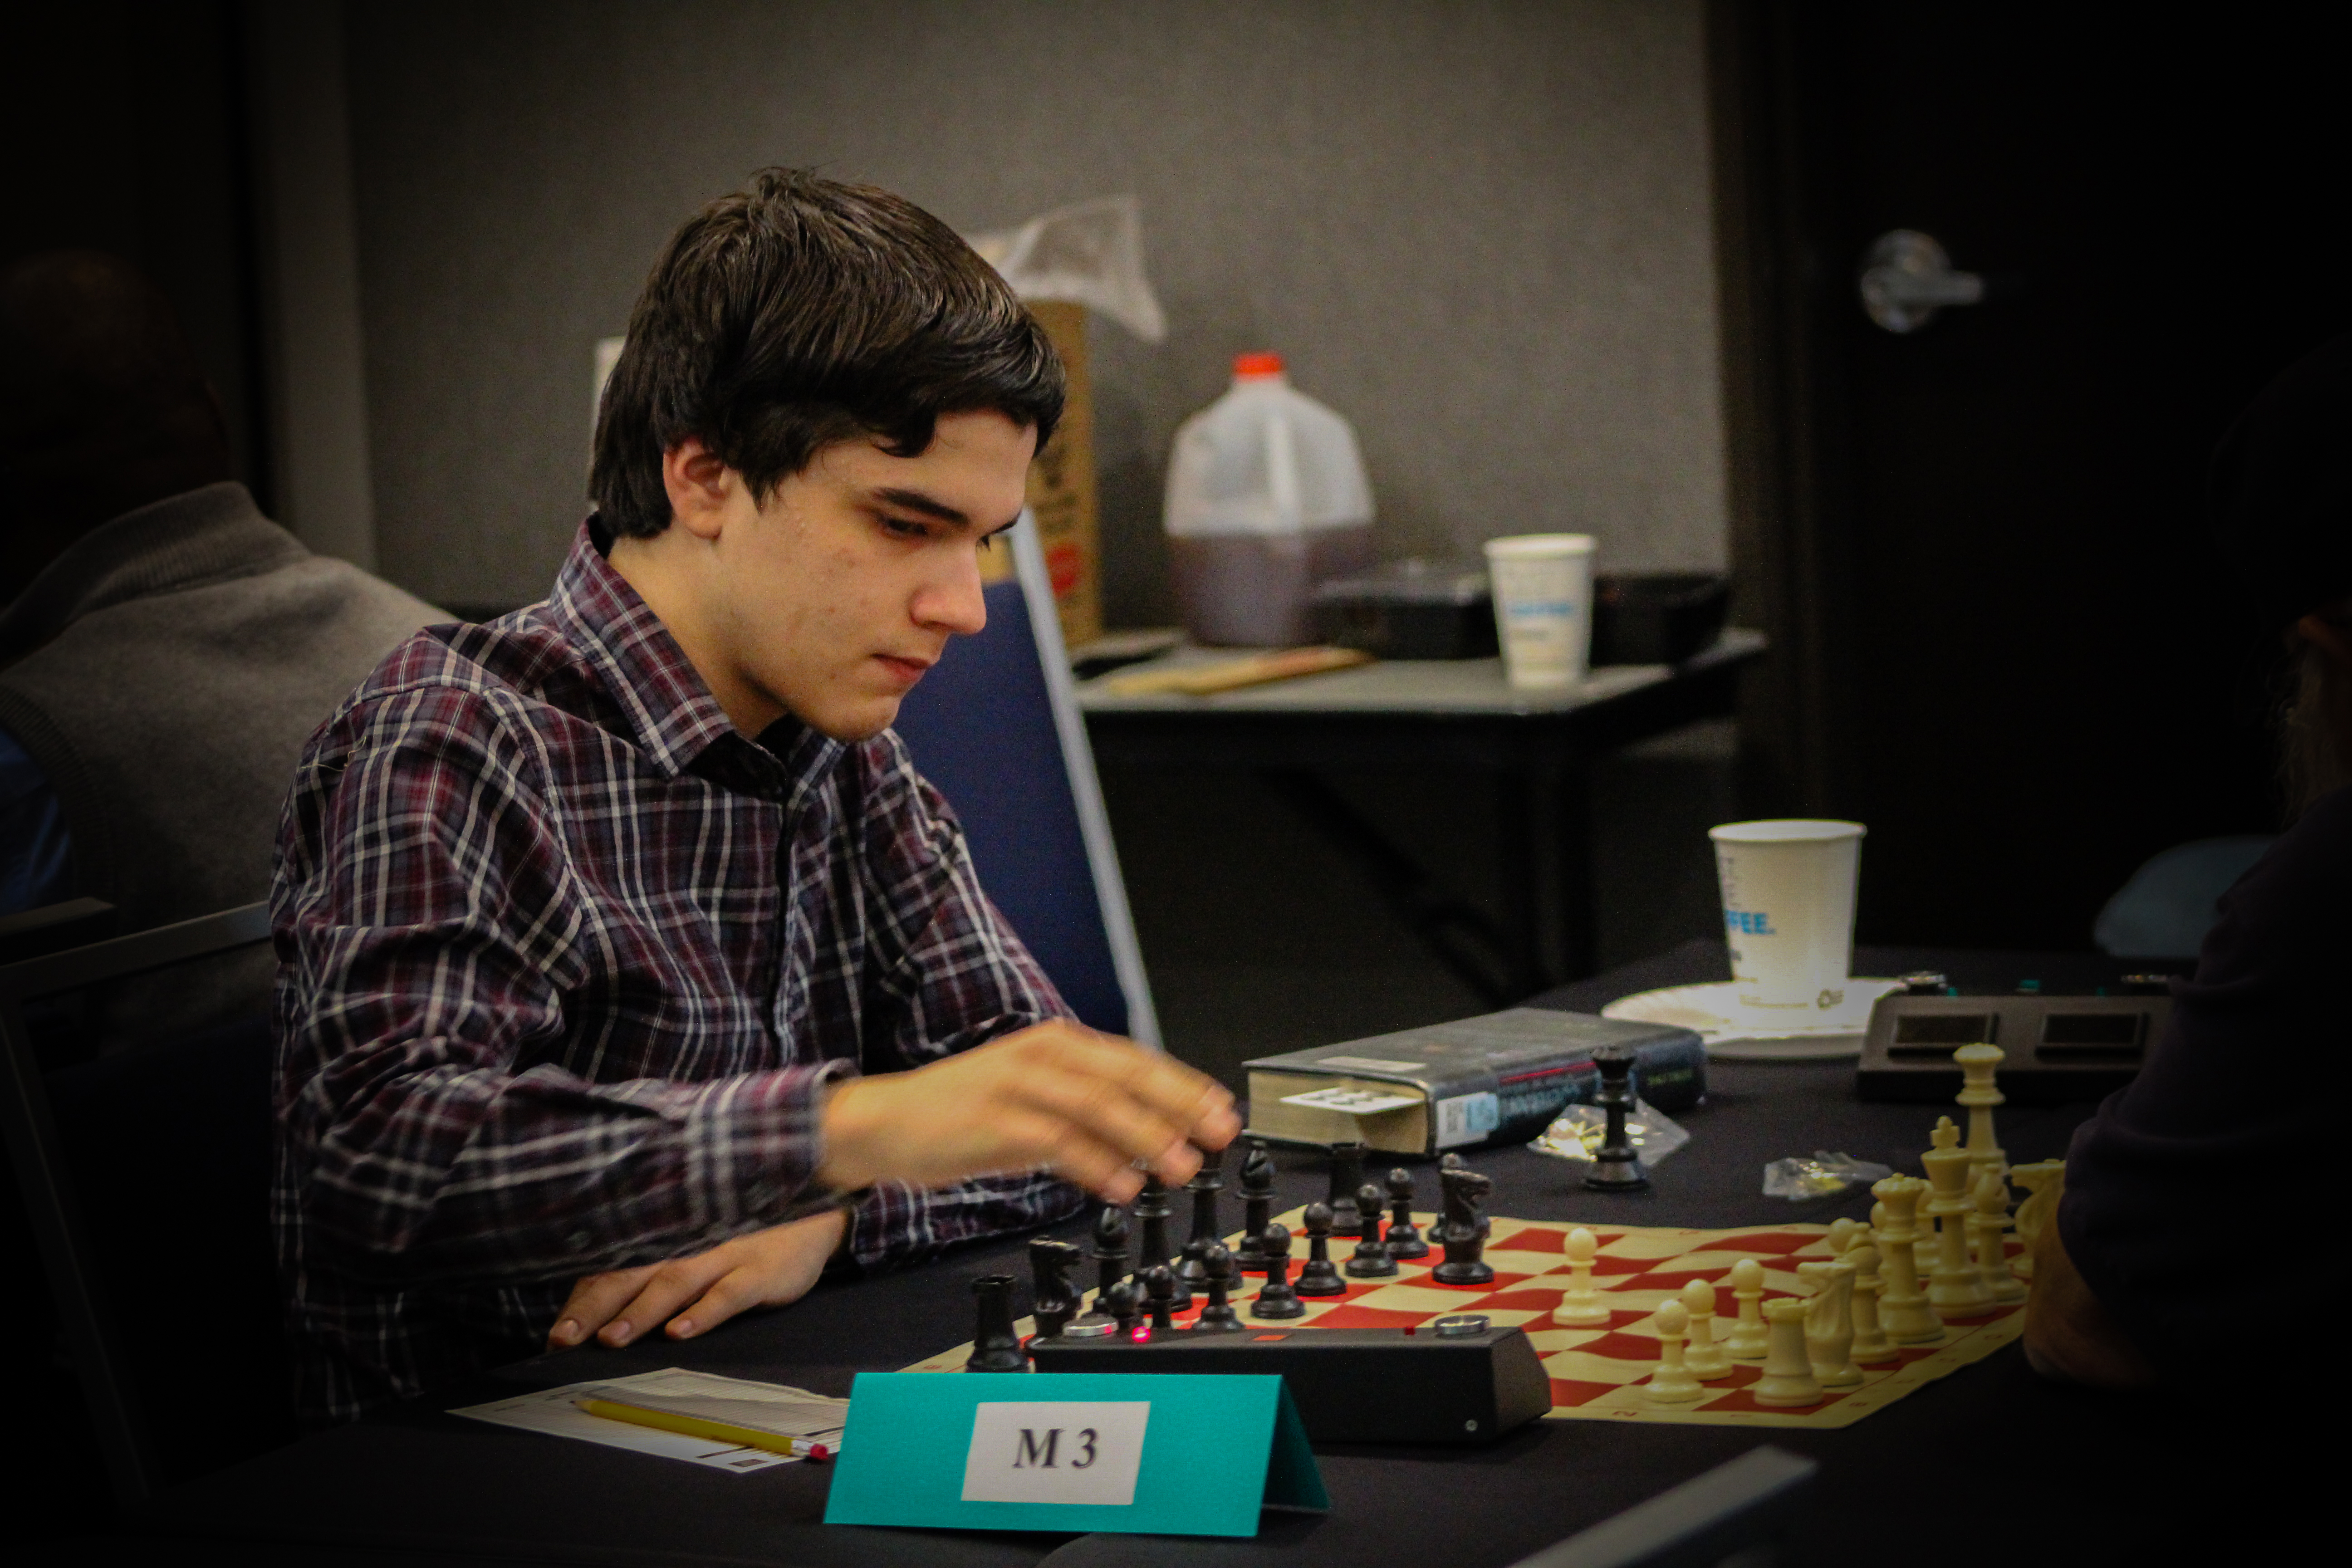 fpawn chess blog: Percentiles of USCF ratings for Northern California